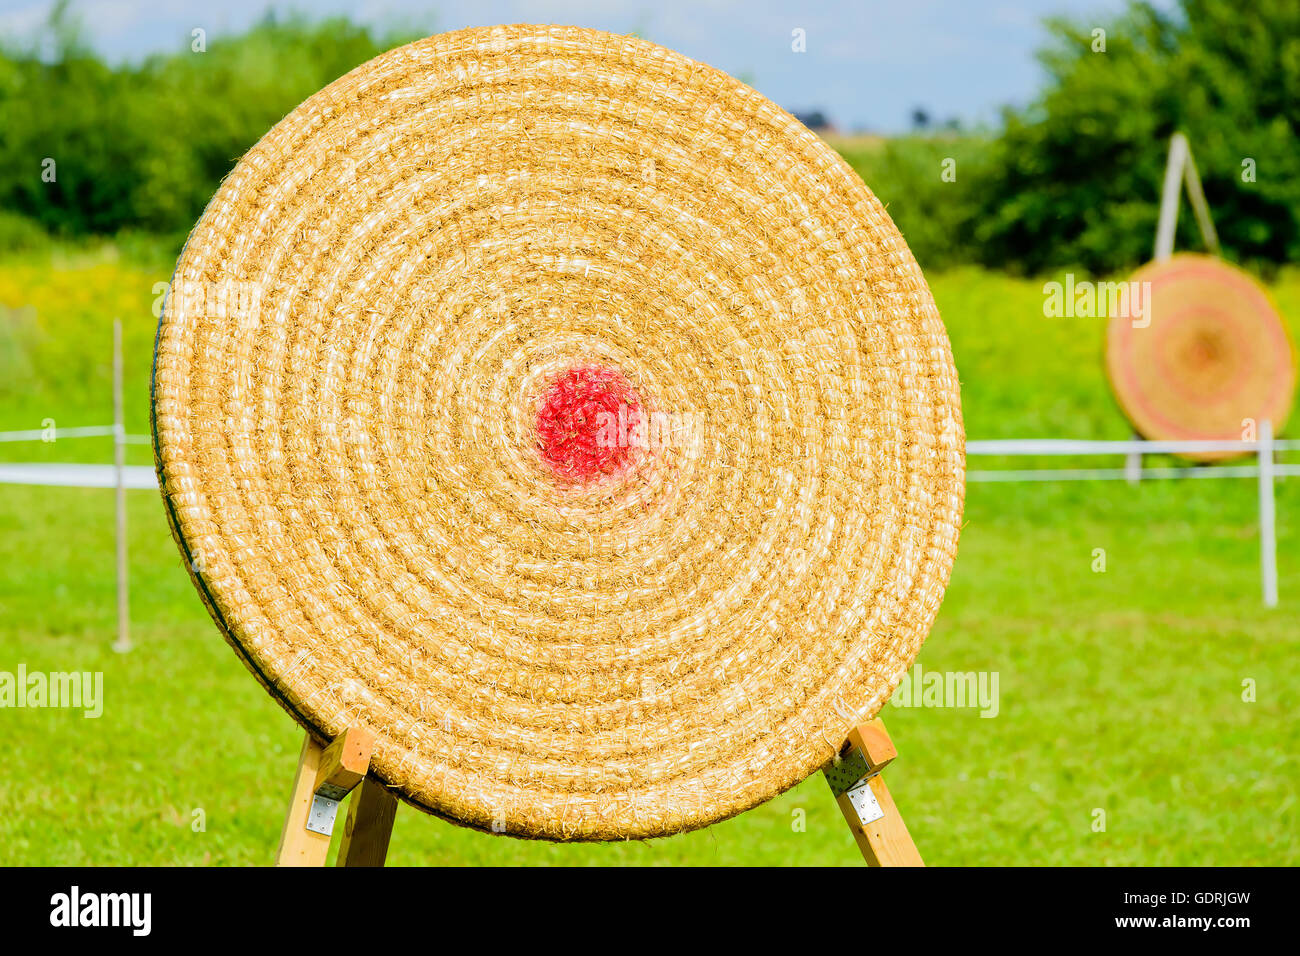 Outdoor archery target made of straw with a red dot as bullseye. Stock Photo